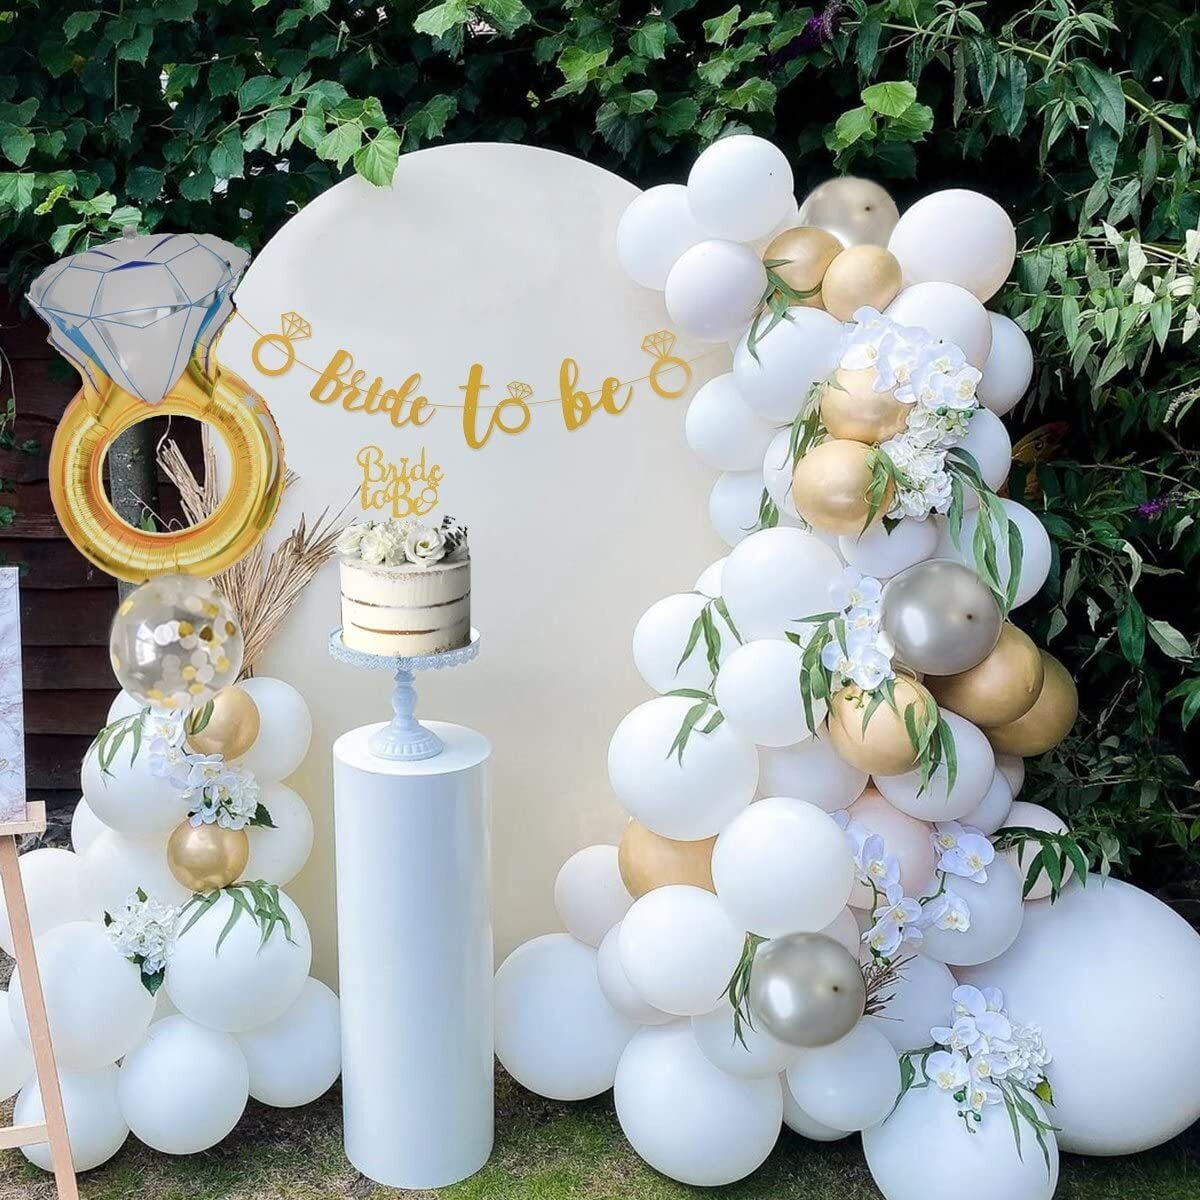 100 Bridal Shower Decoration Ideas for Any Theme - Yeah Weddings